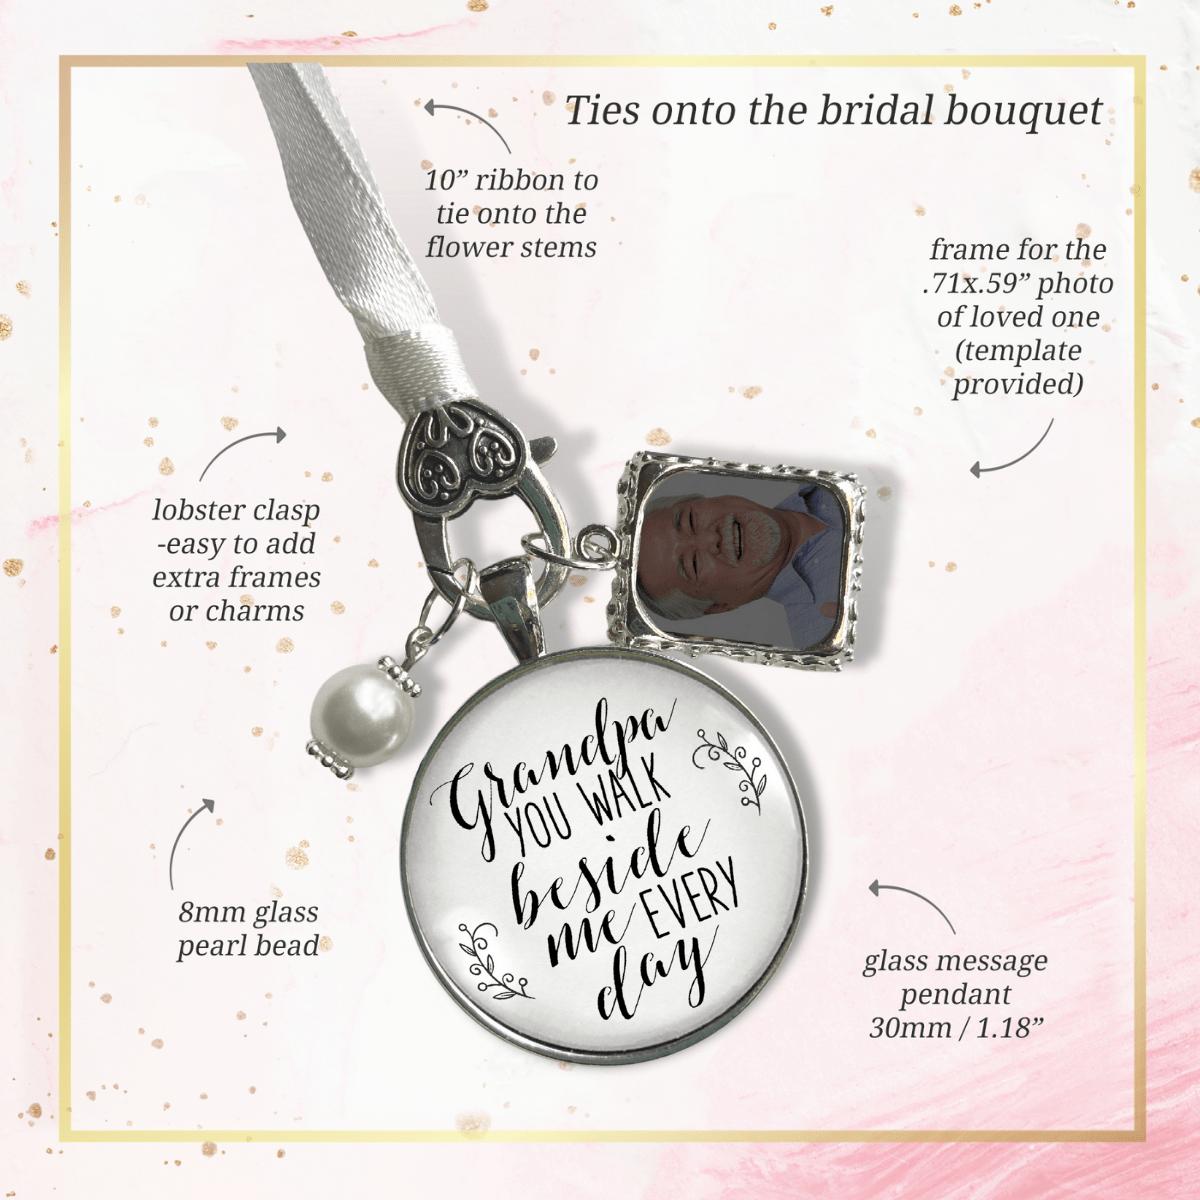 Bridal Bouquet Charm Grandpa Picture Frame Wedding Memorial Silver Finish Jewelry - Gutsy Goodness Handmade Jewelry Gifts